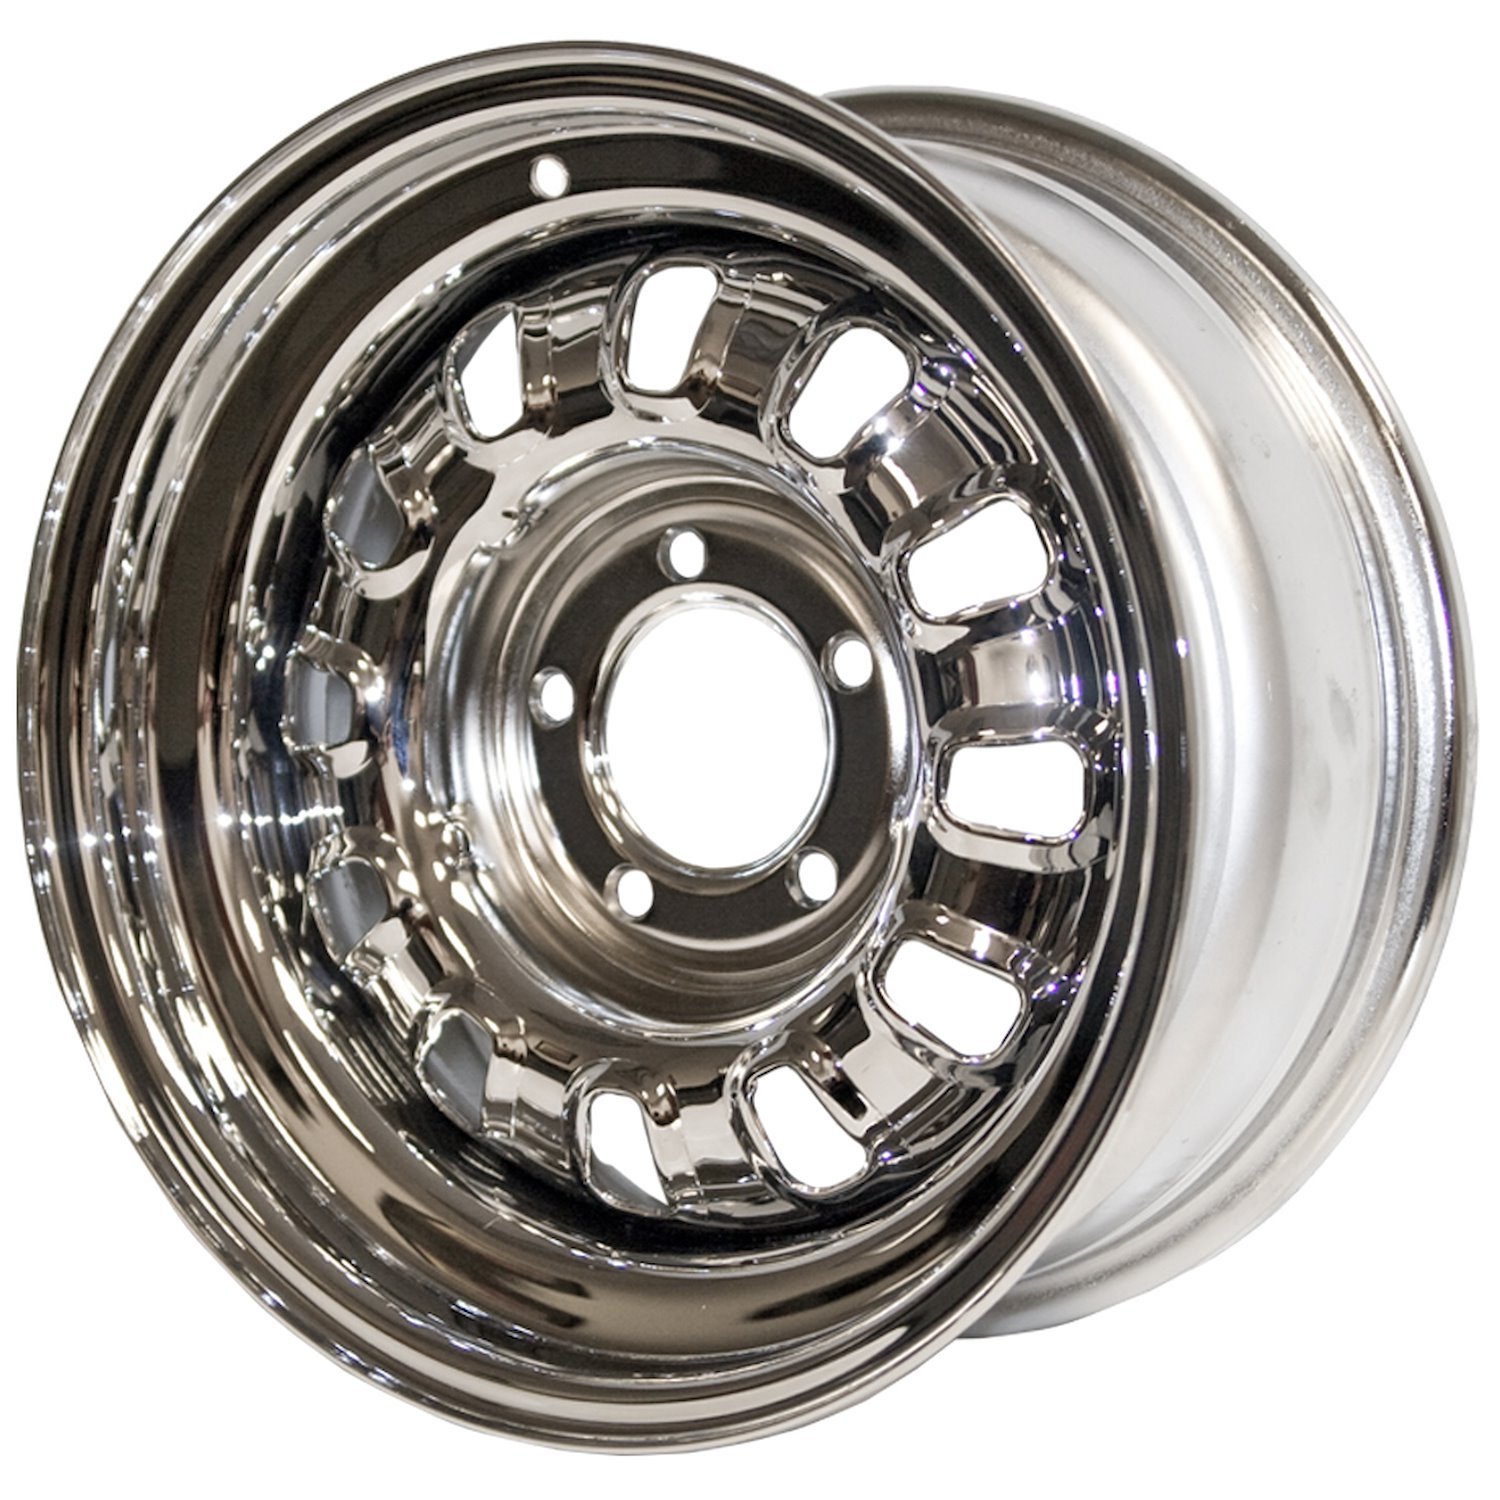 C8OZ Mustang-Style Steel Chrome Wheel [Size: 15